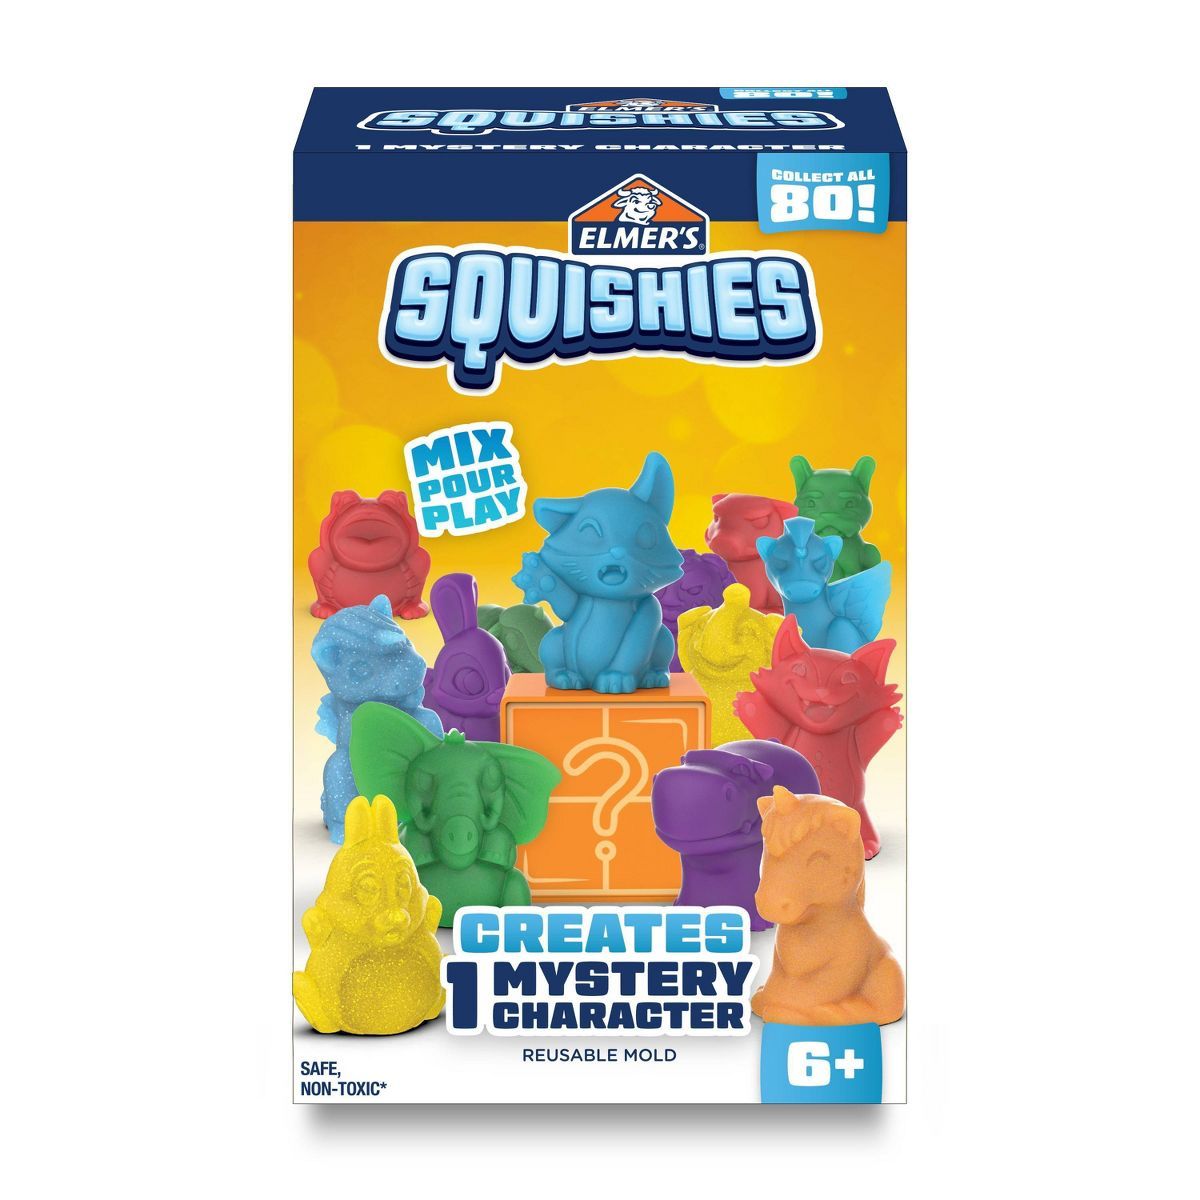 Elmer's Squishies DIY Toy Activity Kit with Mystery Character | Target